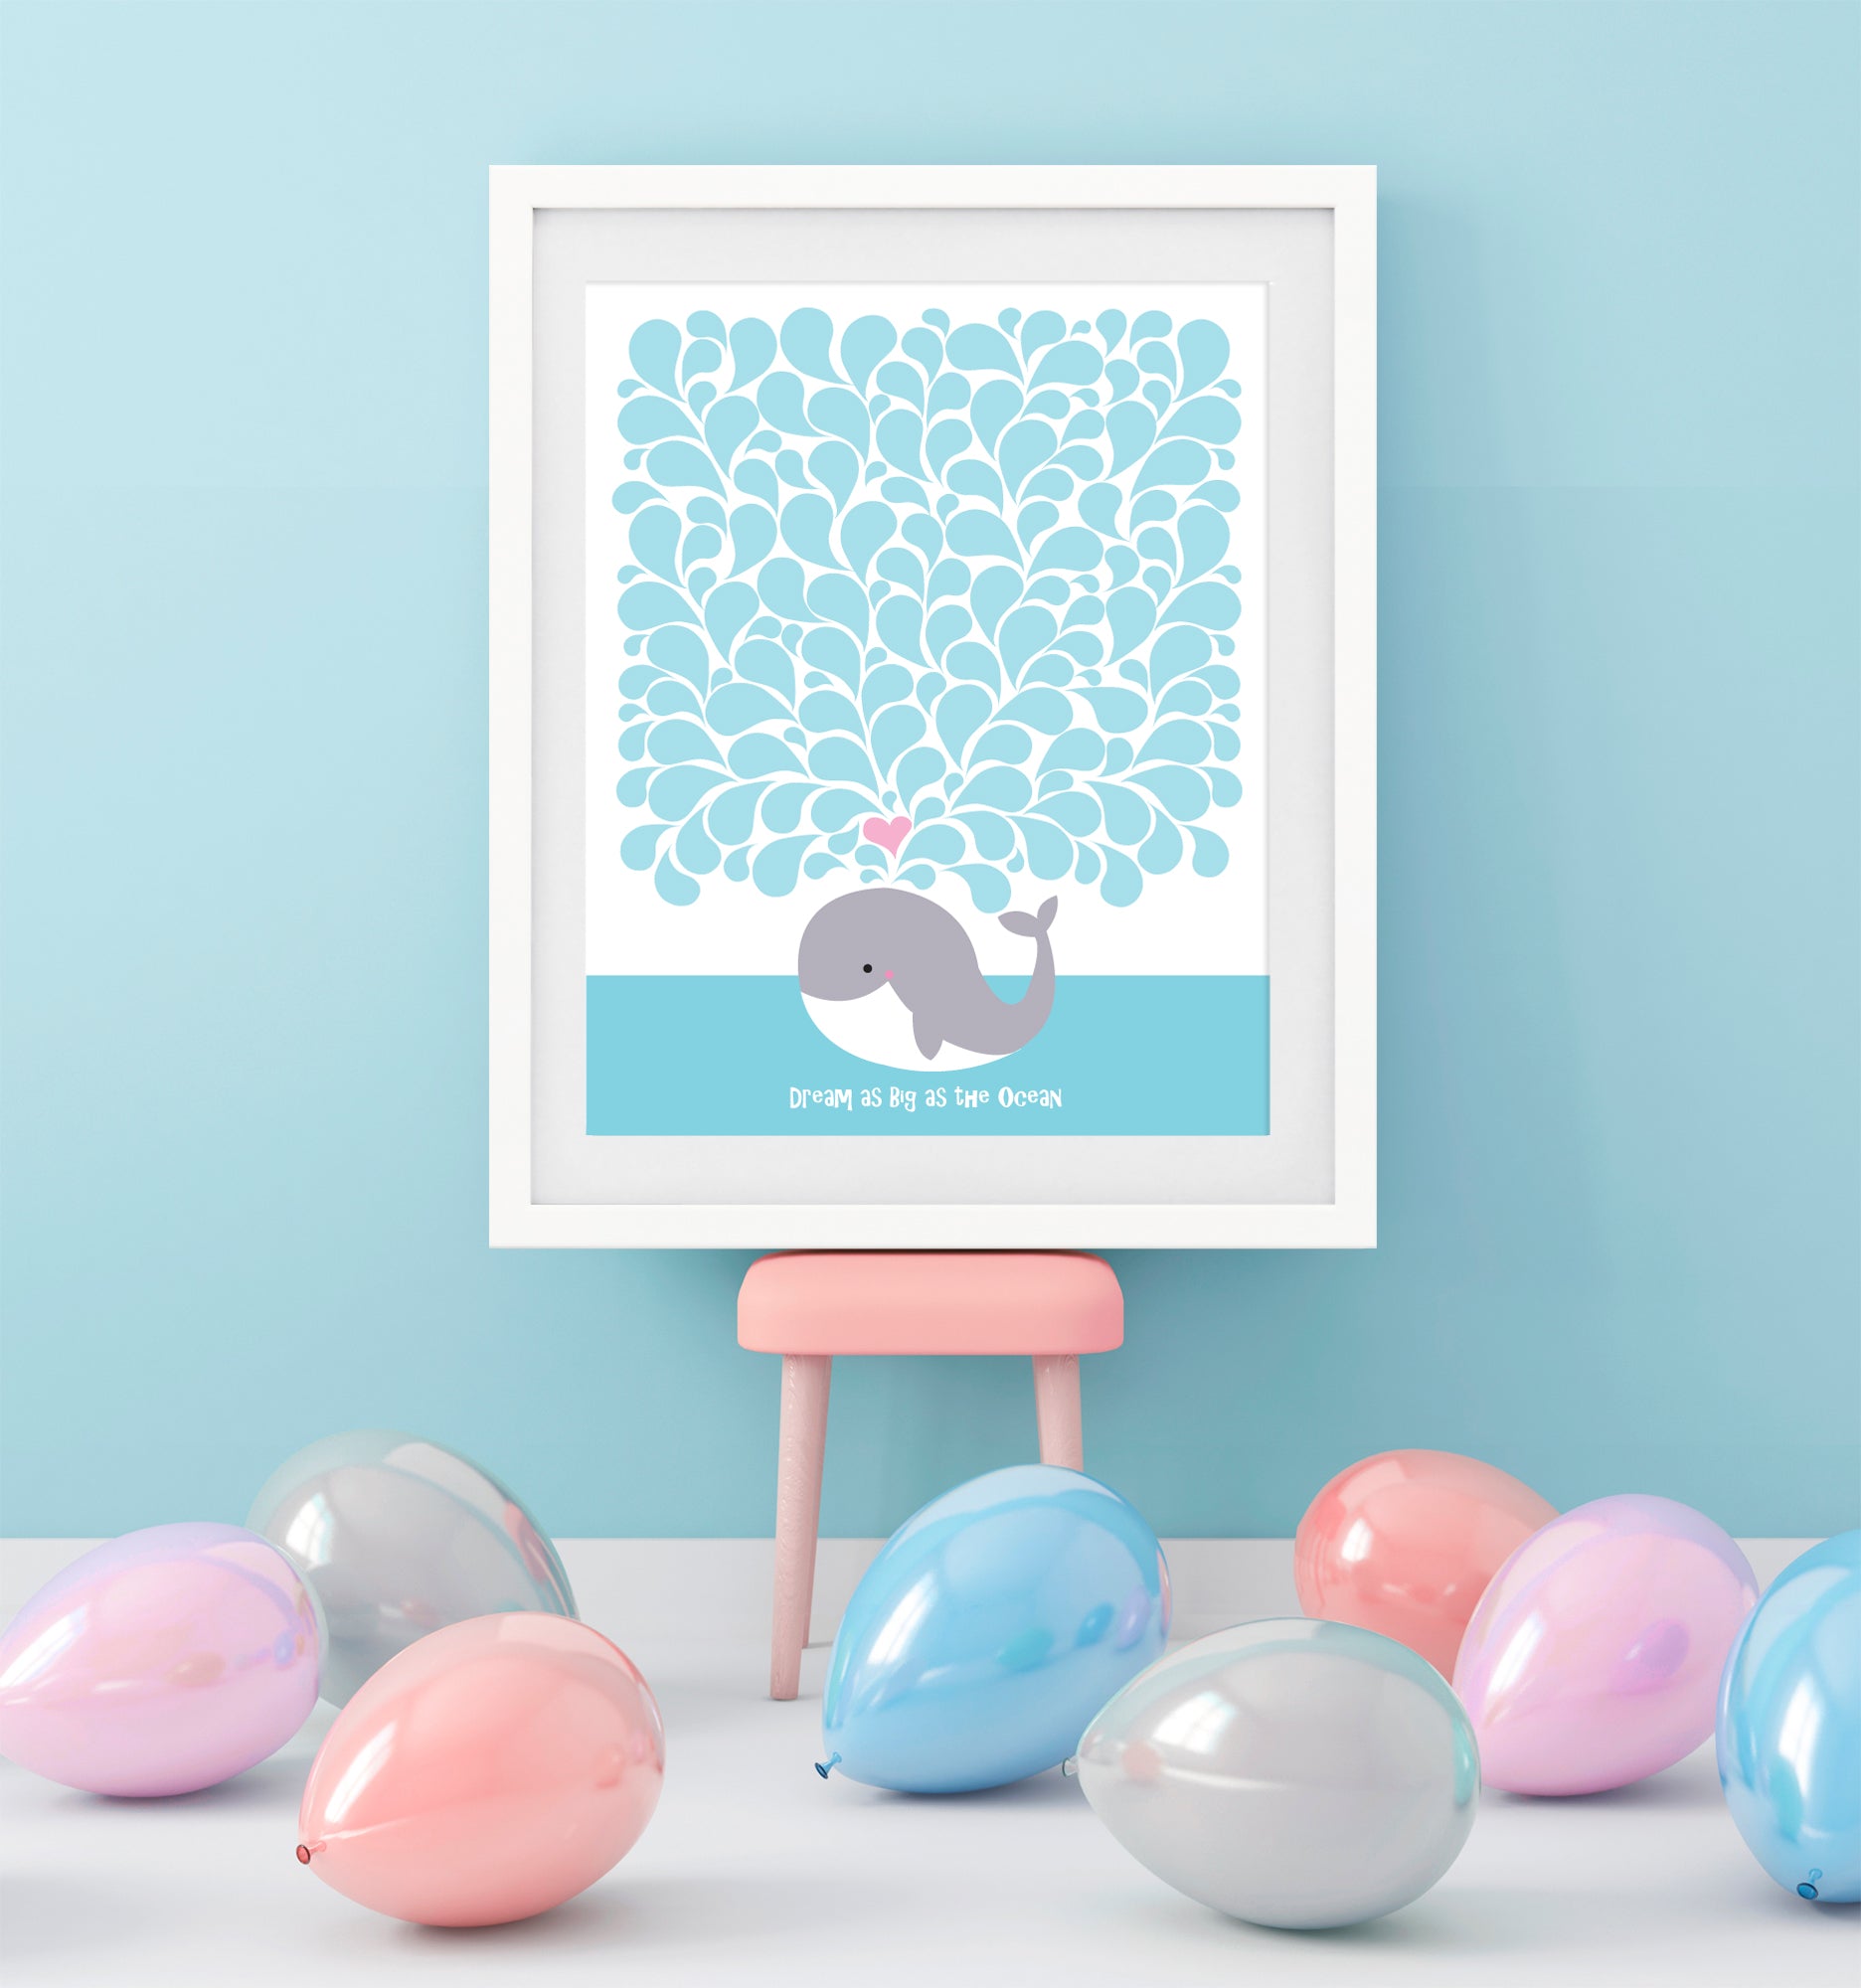 guestbook poster at a party in a frame with whale design in water droplets for guests to sign inside